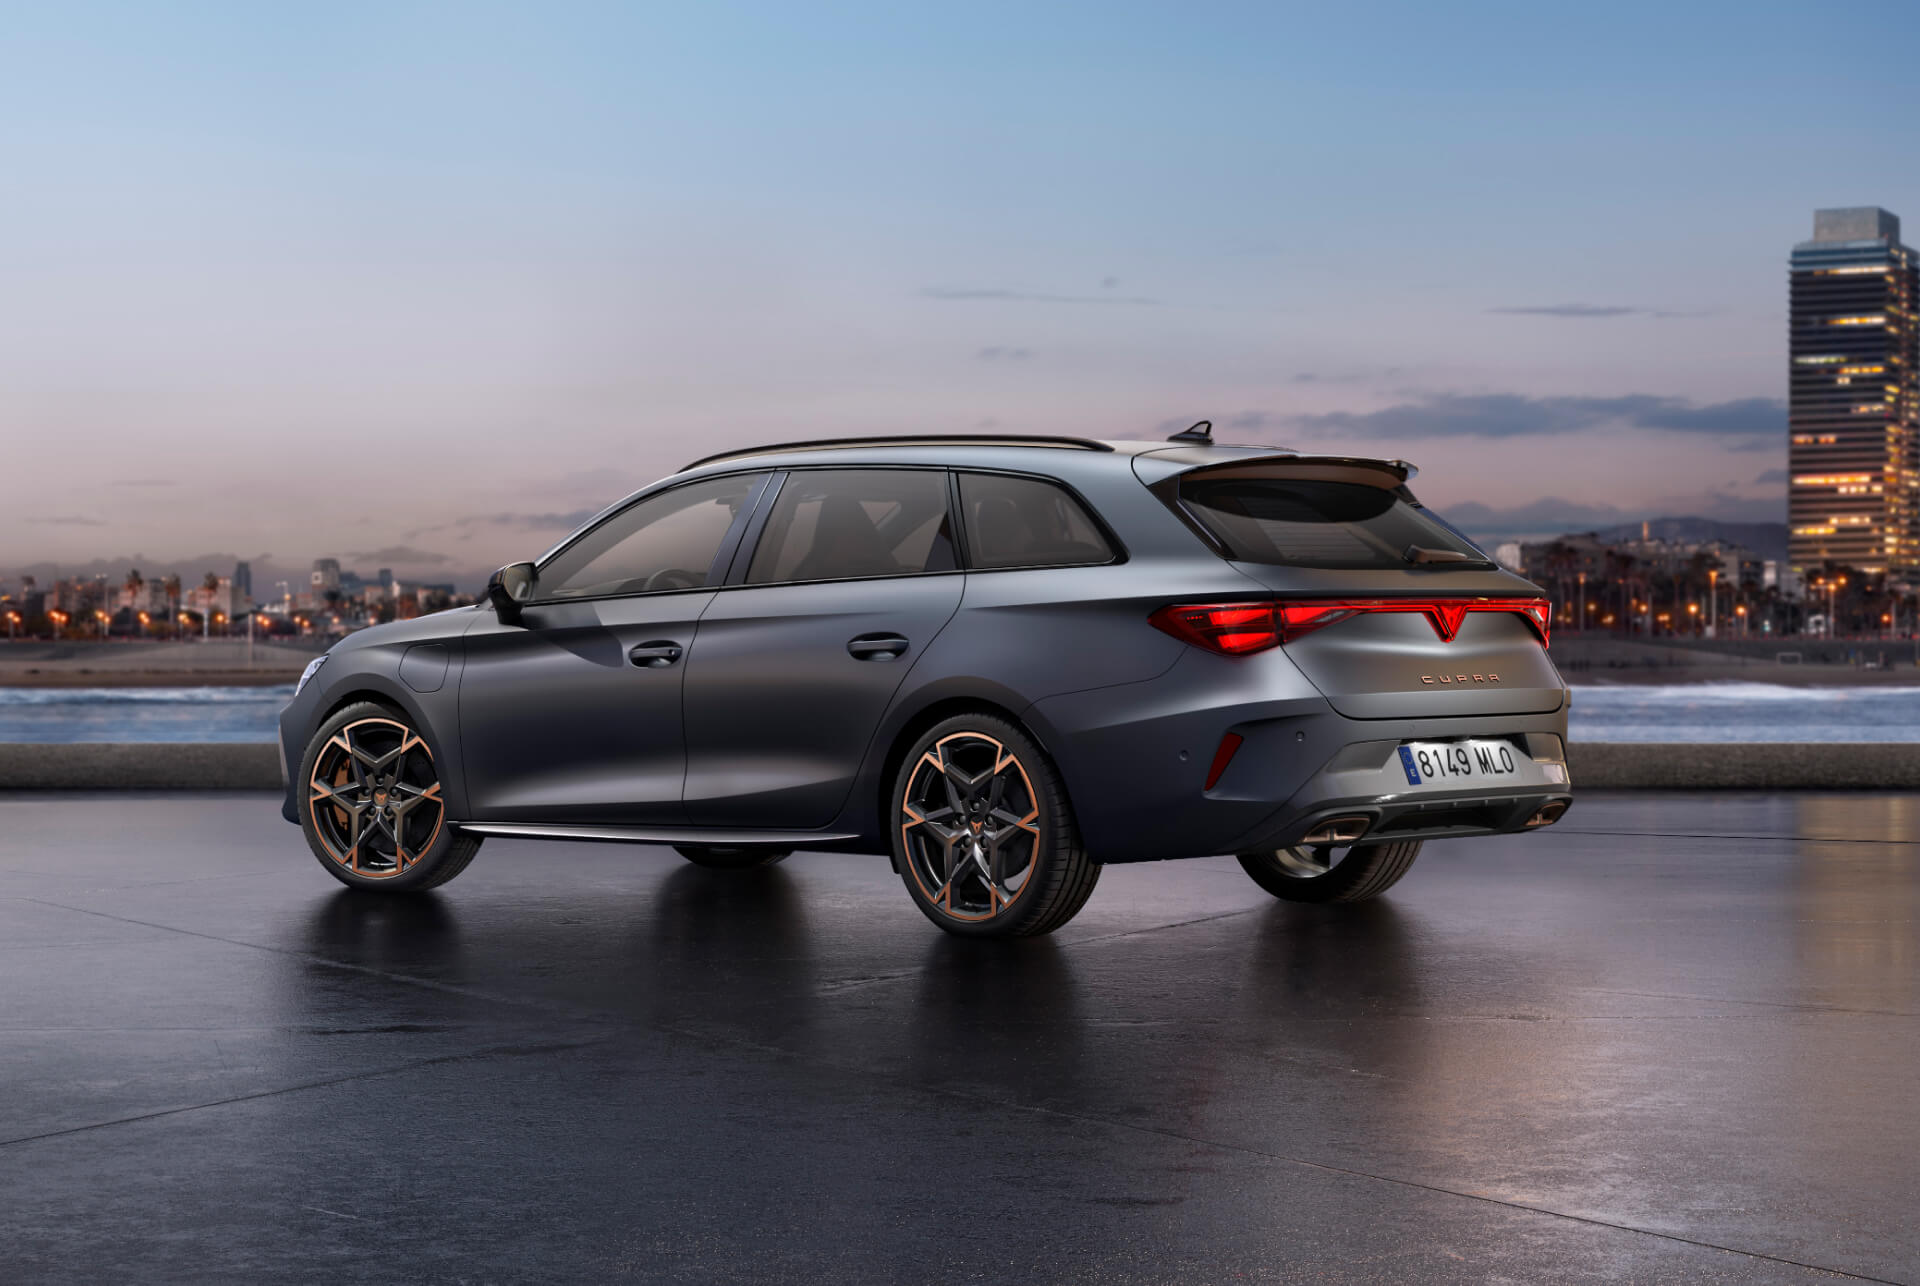 The sporty new 2024 Cupra Leon Sportstourer parked on concrete with a city skyline illuminated at twilight in the background. The vehicle is depicted in a matte grey finish.